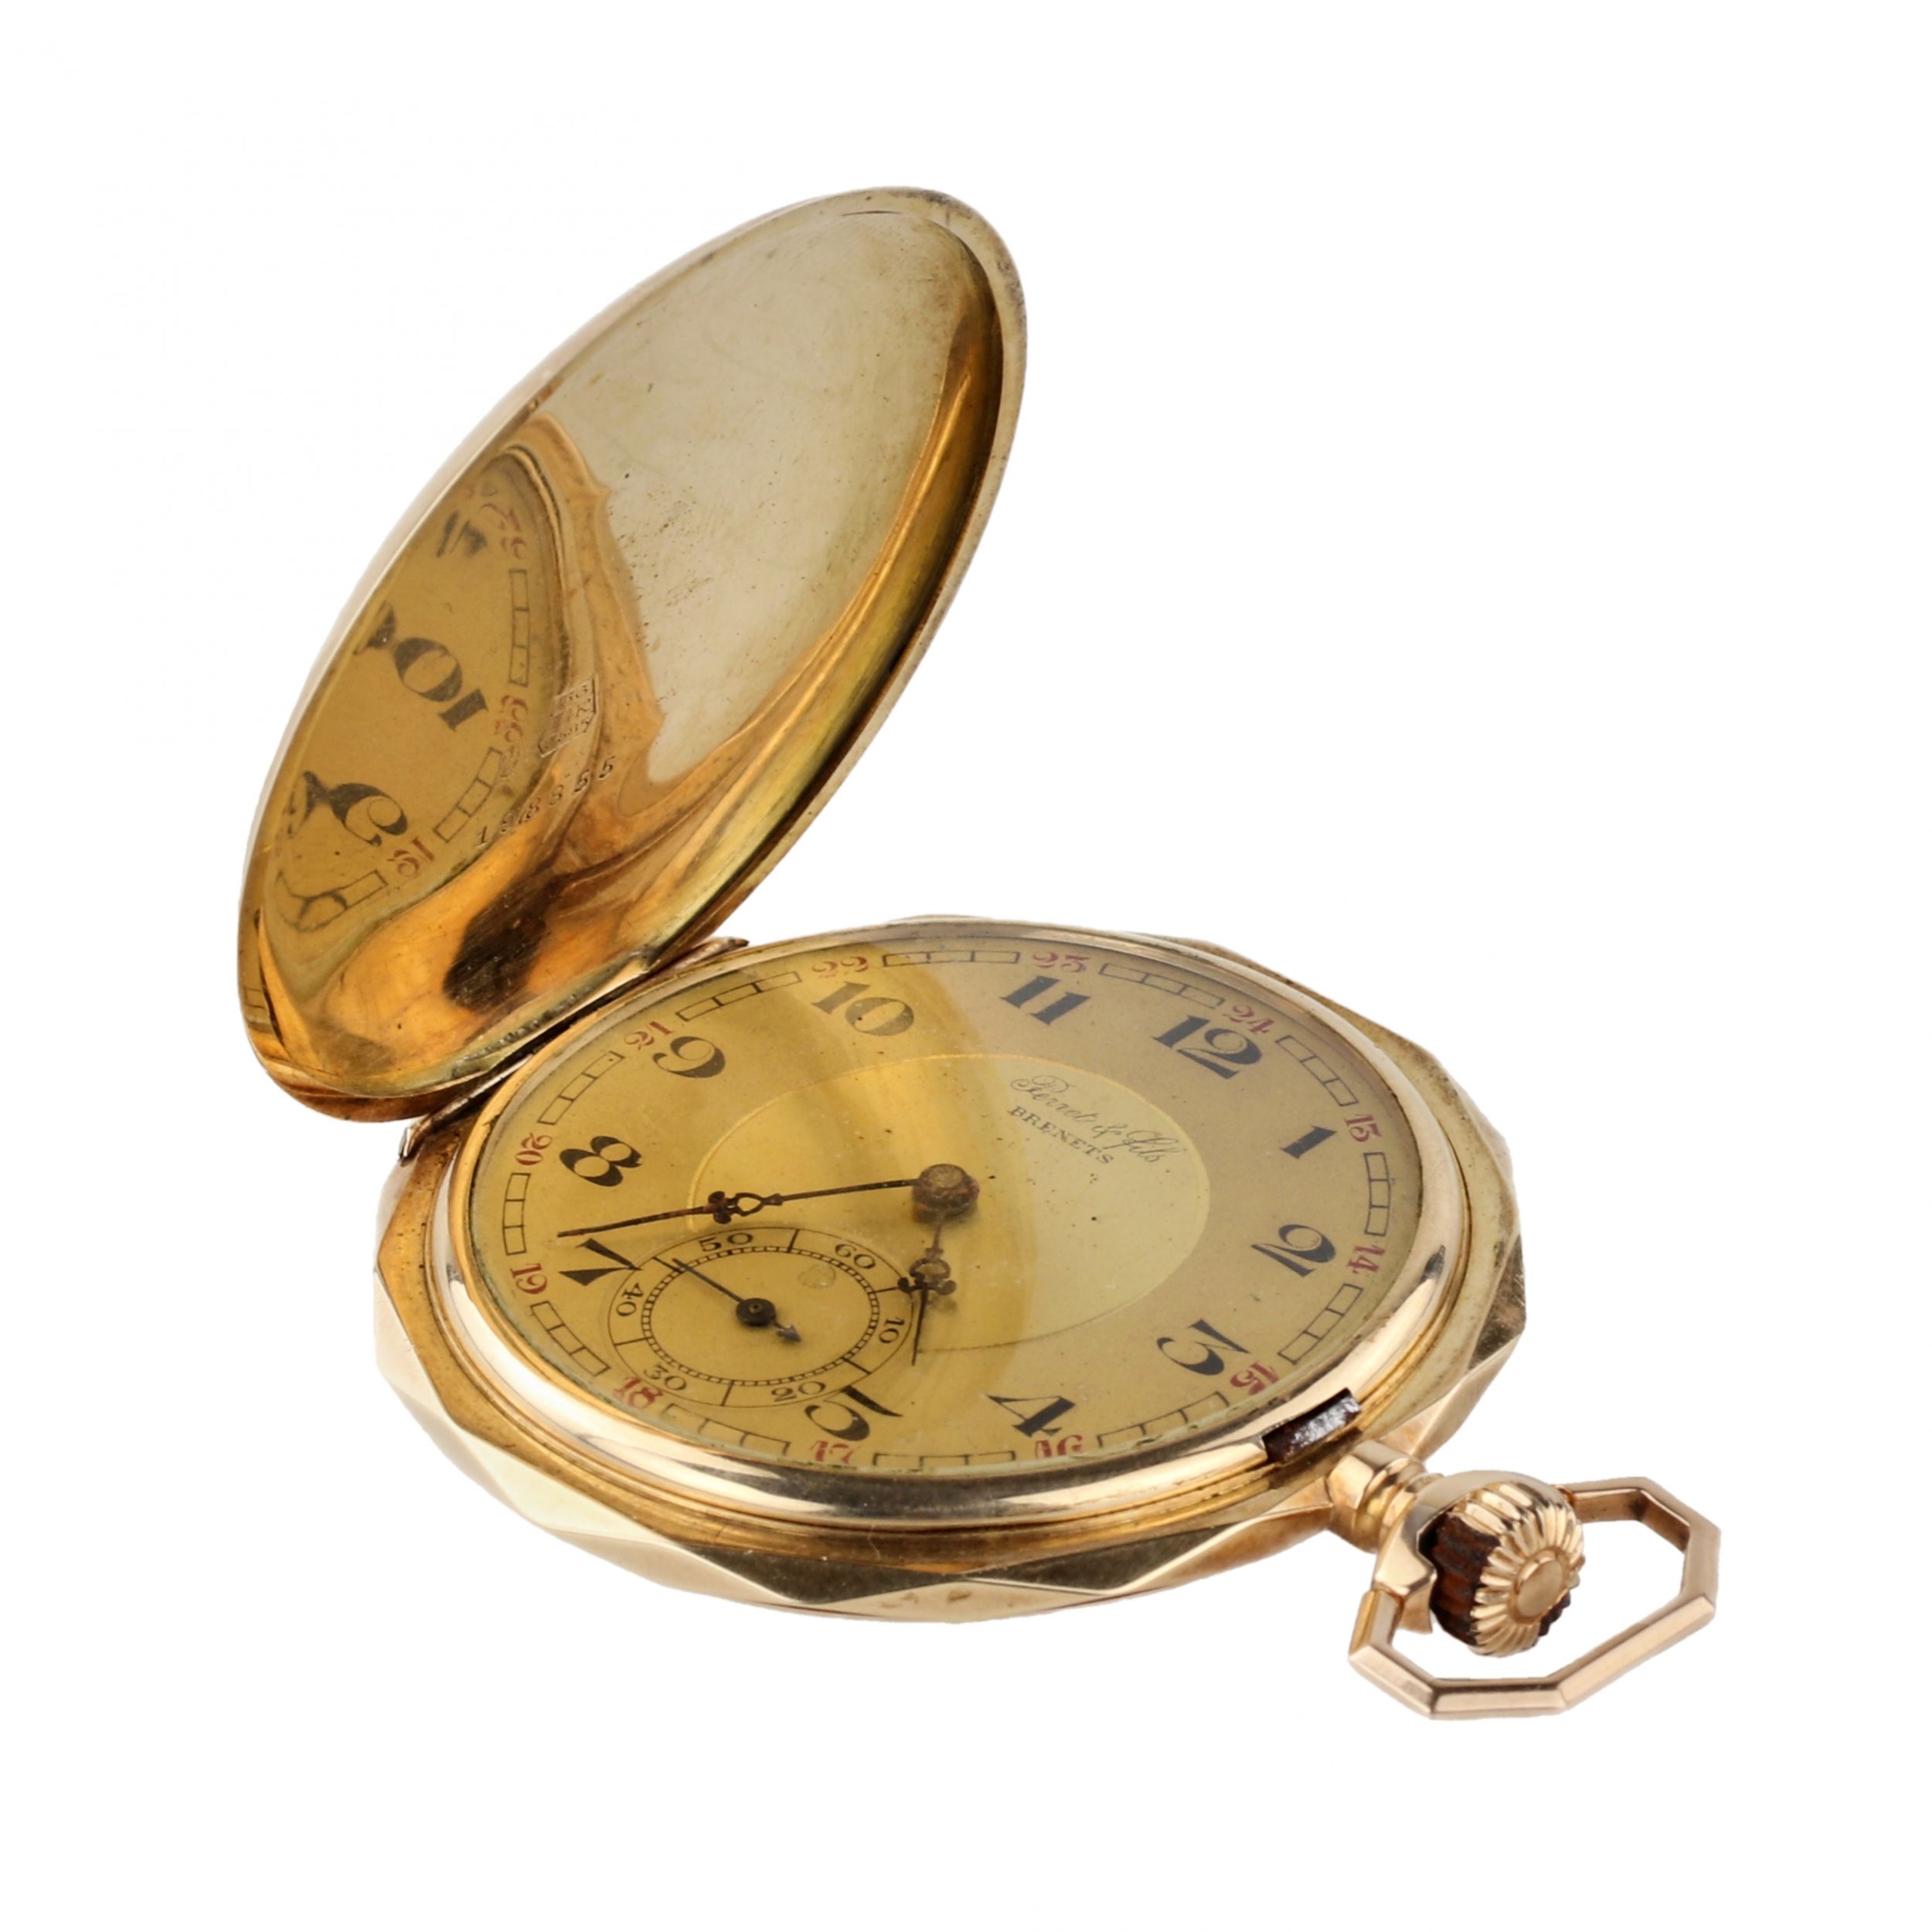 Perret-and-Fils-Brenets-gold-pocket-watch-Early-20th-century-672-gr-